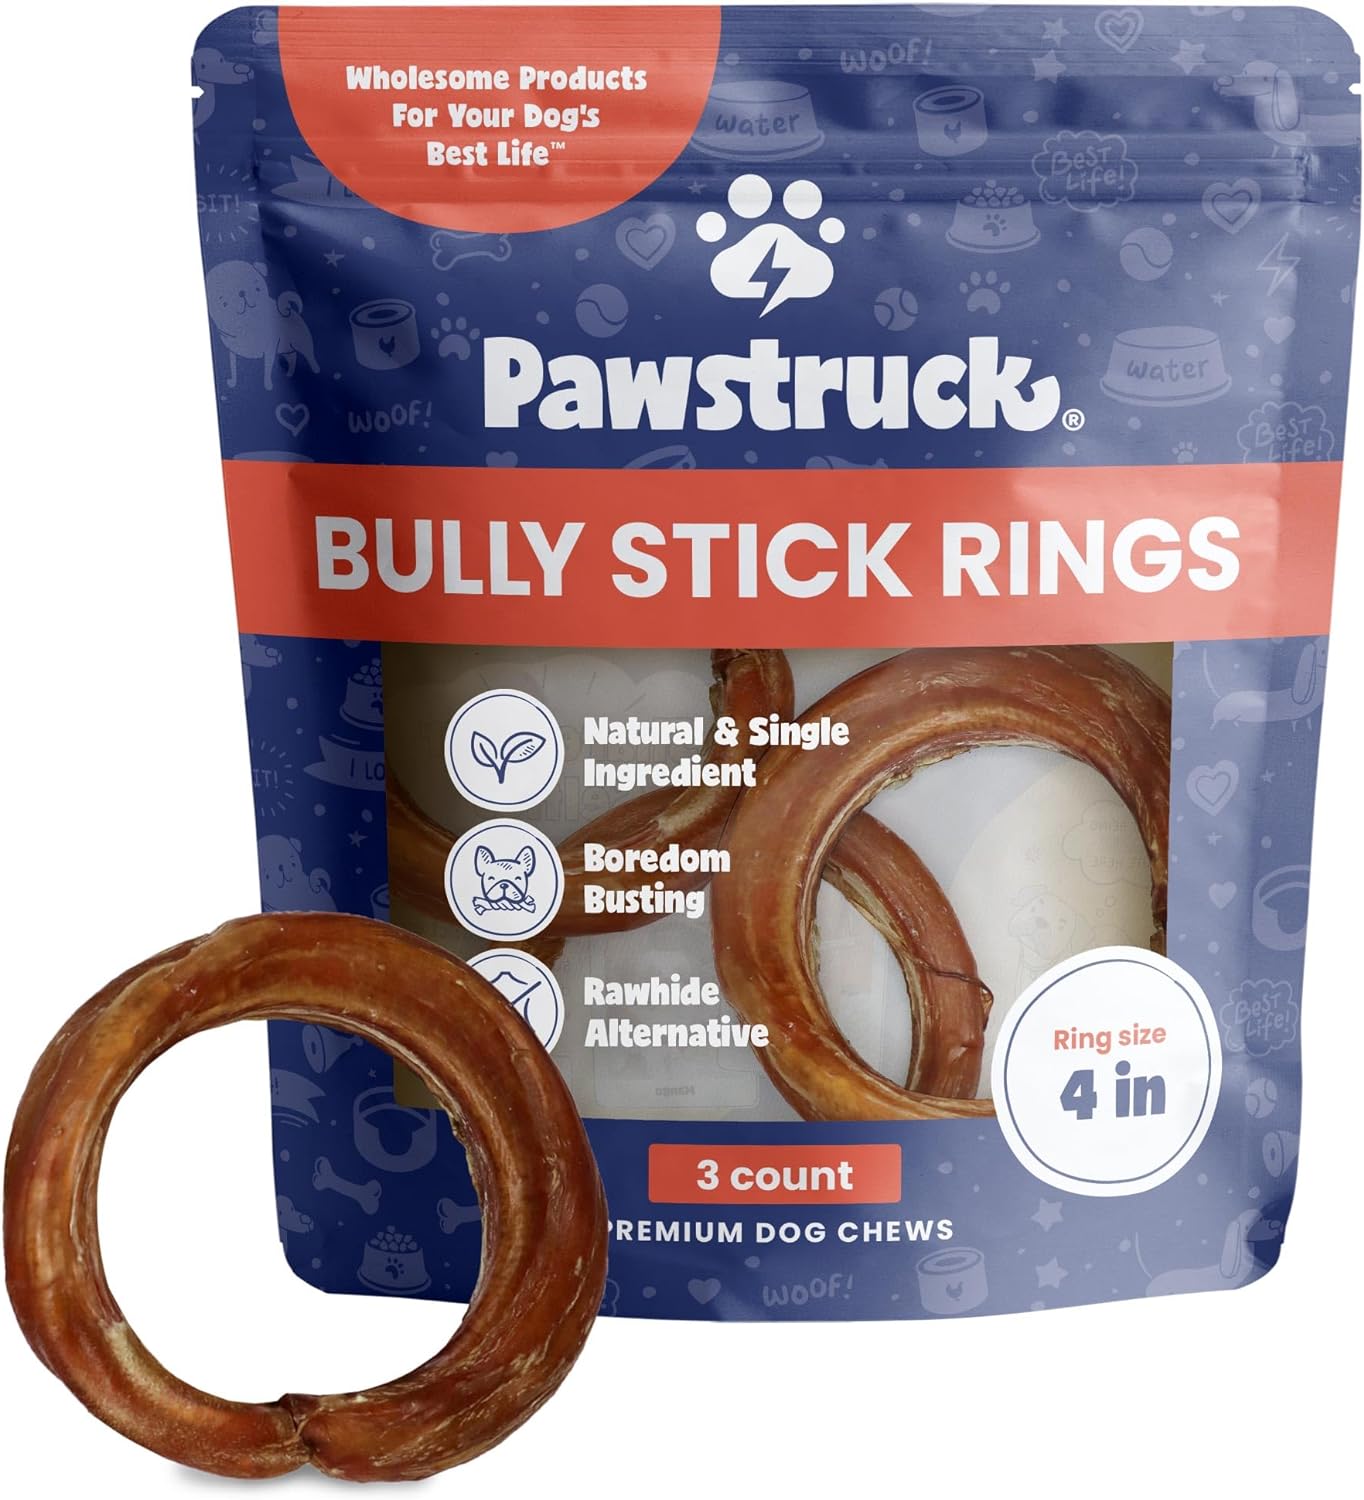 Pawstruck All-Natural 4" Bully Stick Rings for Dogs - Rawhide Free 100% Beef Single Ingredient Dental Chew Treat Bones - Fully Digestible Low Odor - 3 Pack - Packaging May Vary